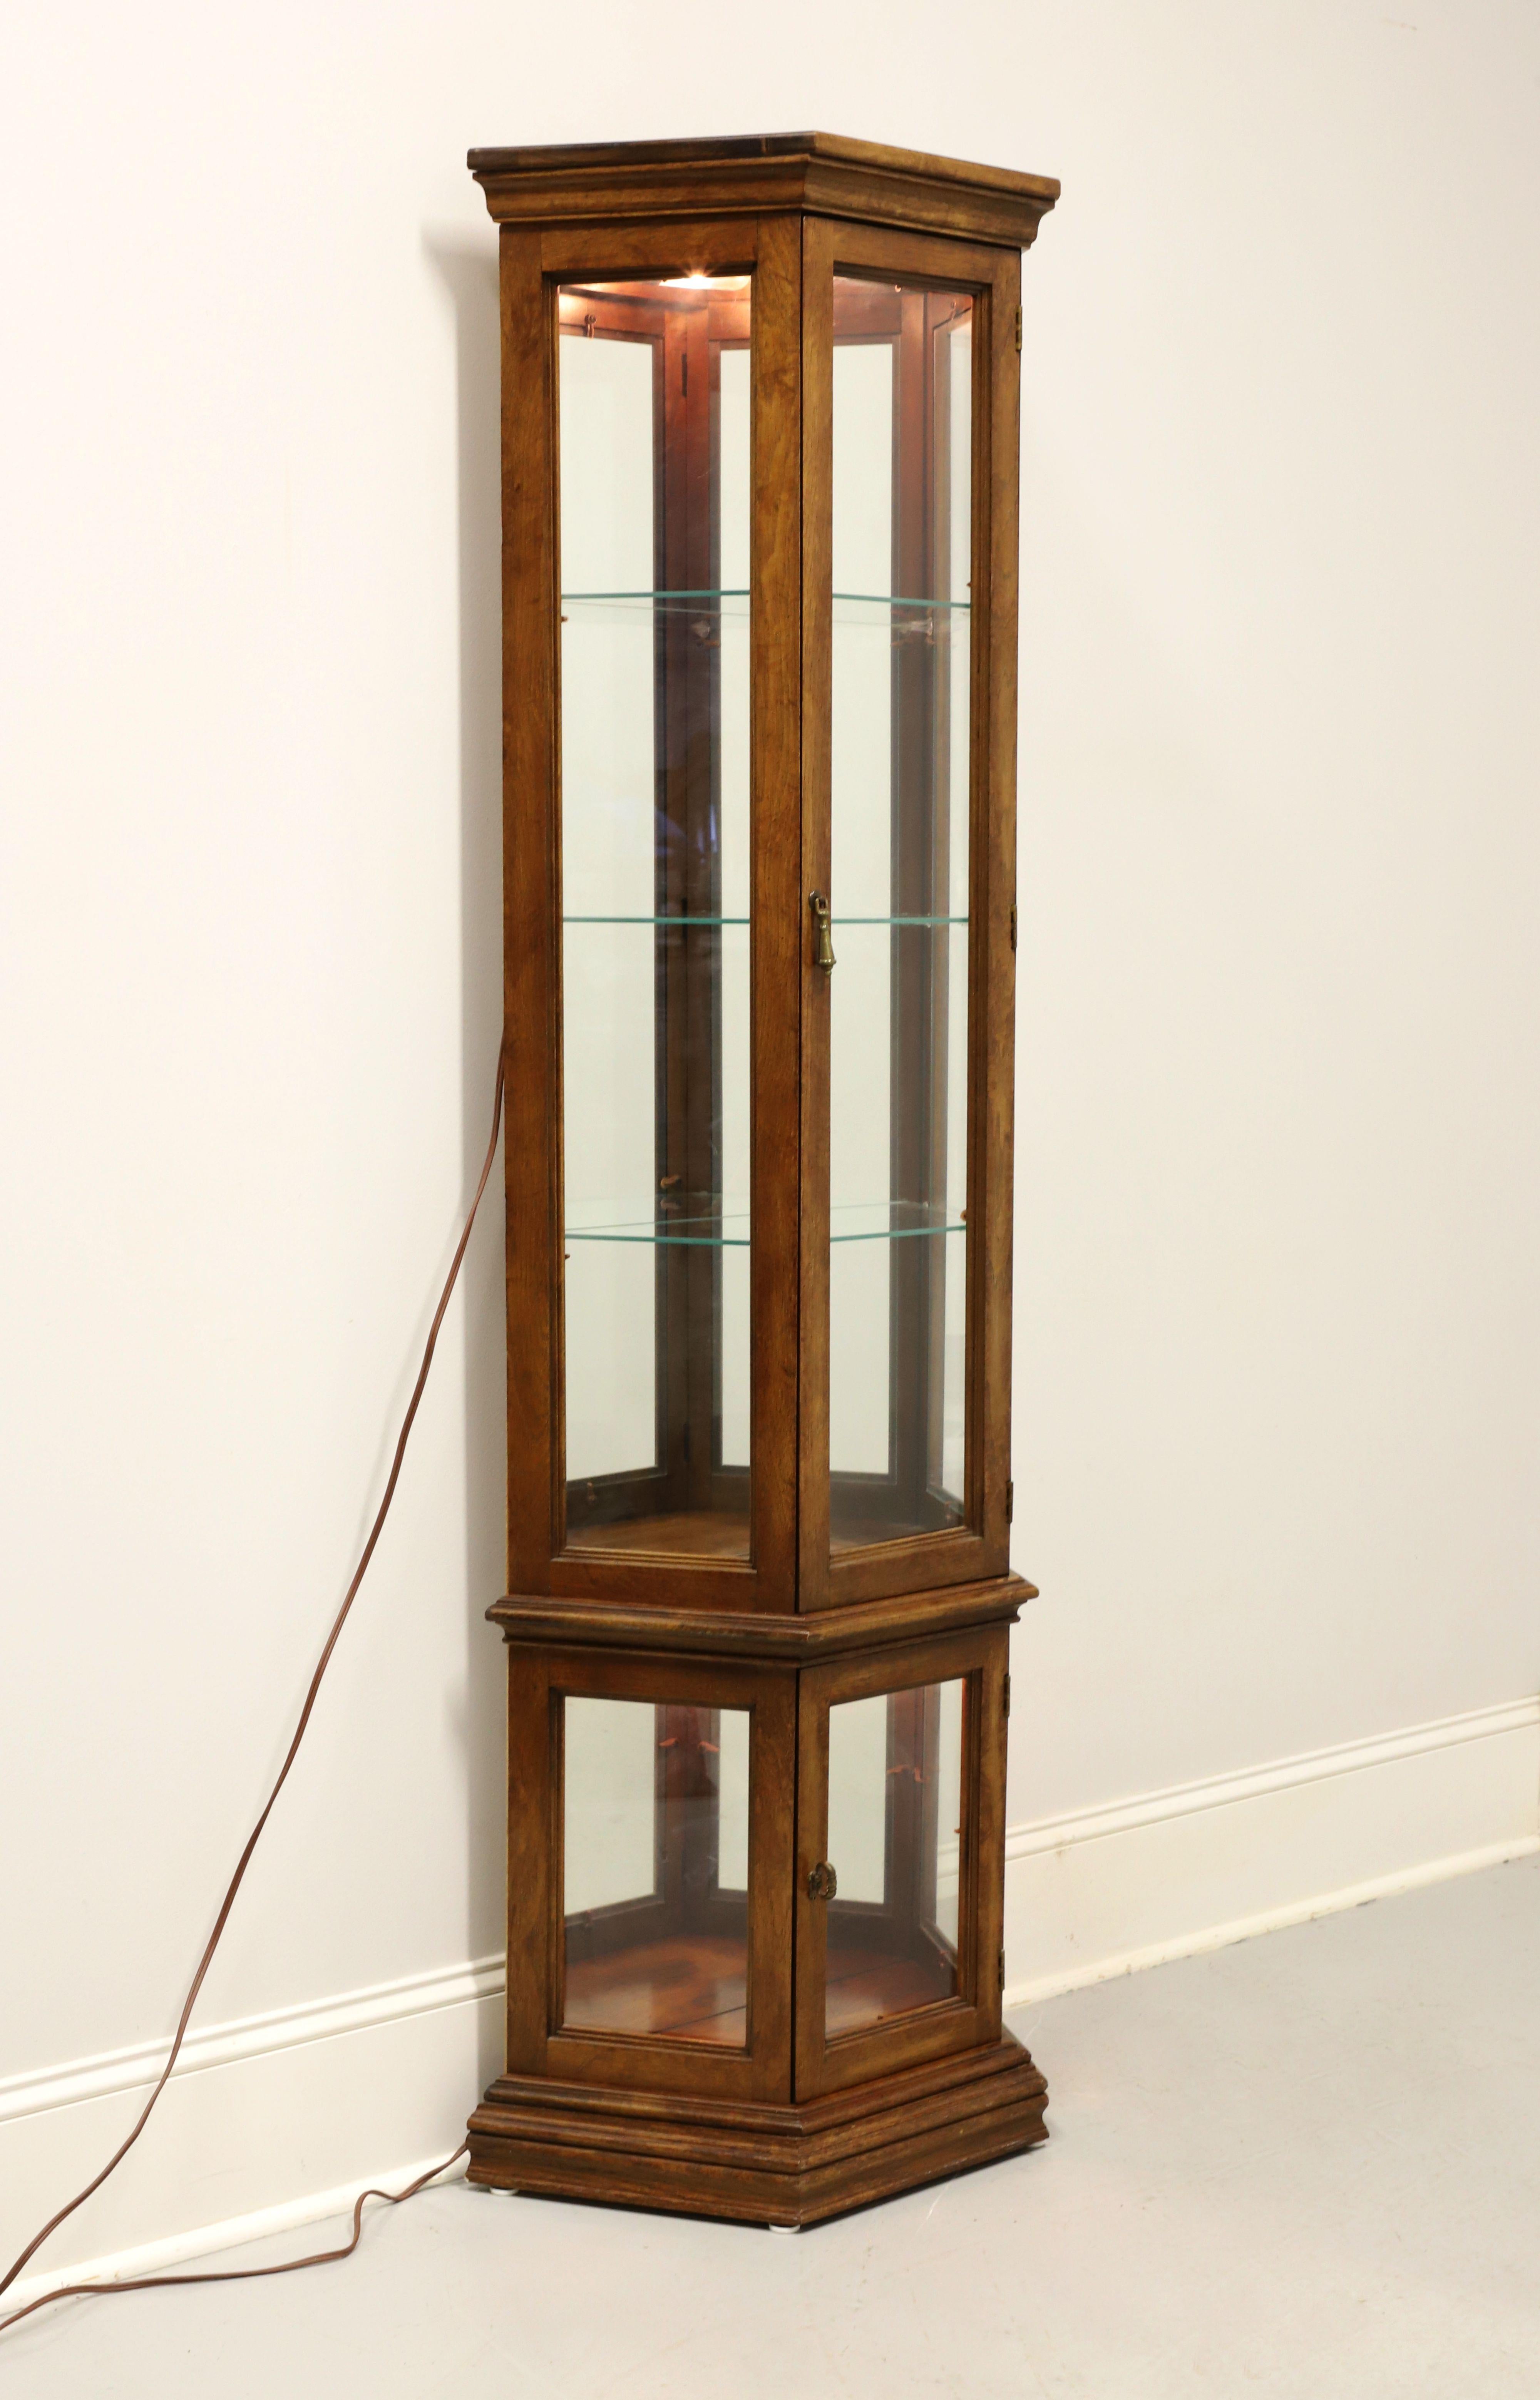 A Traditional style curio display cabinet, unbranded, similar quality to Thomasville or Tomlinson. Walnut with a slightly distressed finish, isosceles trapezoid shape, brass hardware, crown moulding to top, bevel edge to top of lower cabinet, and a